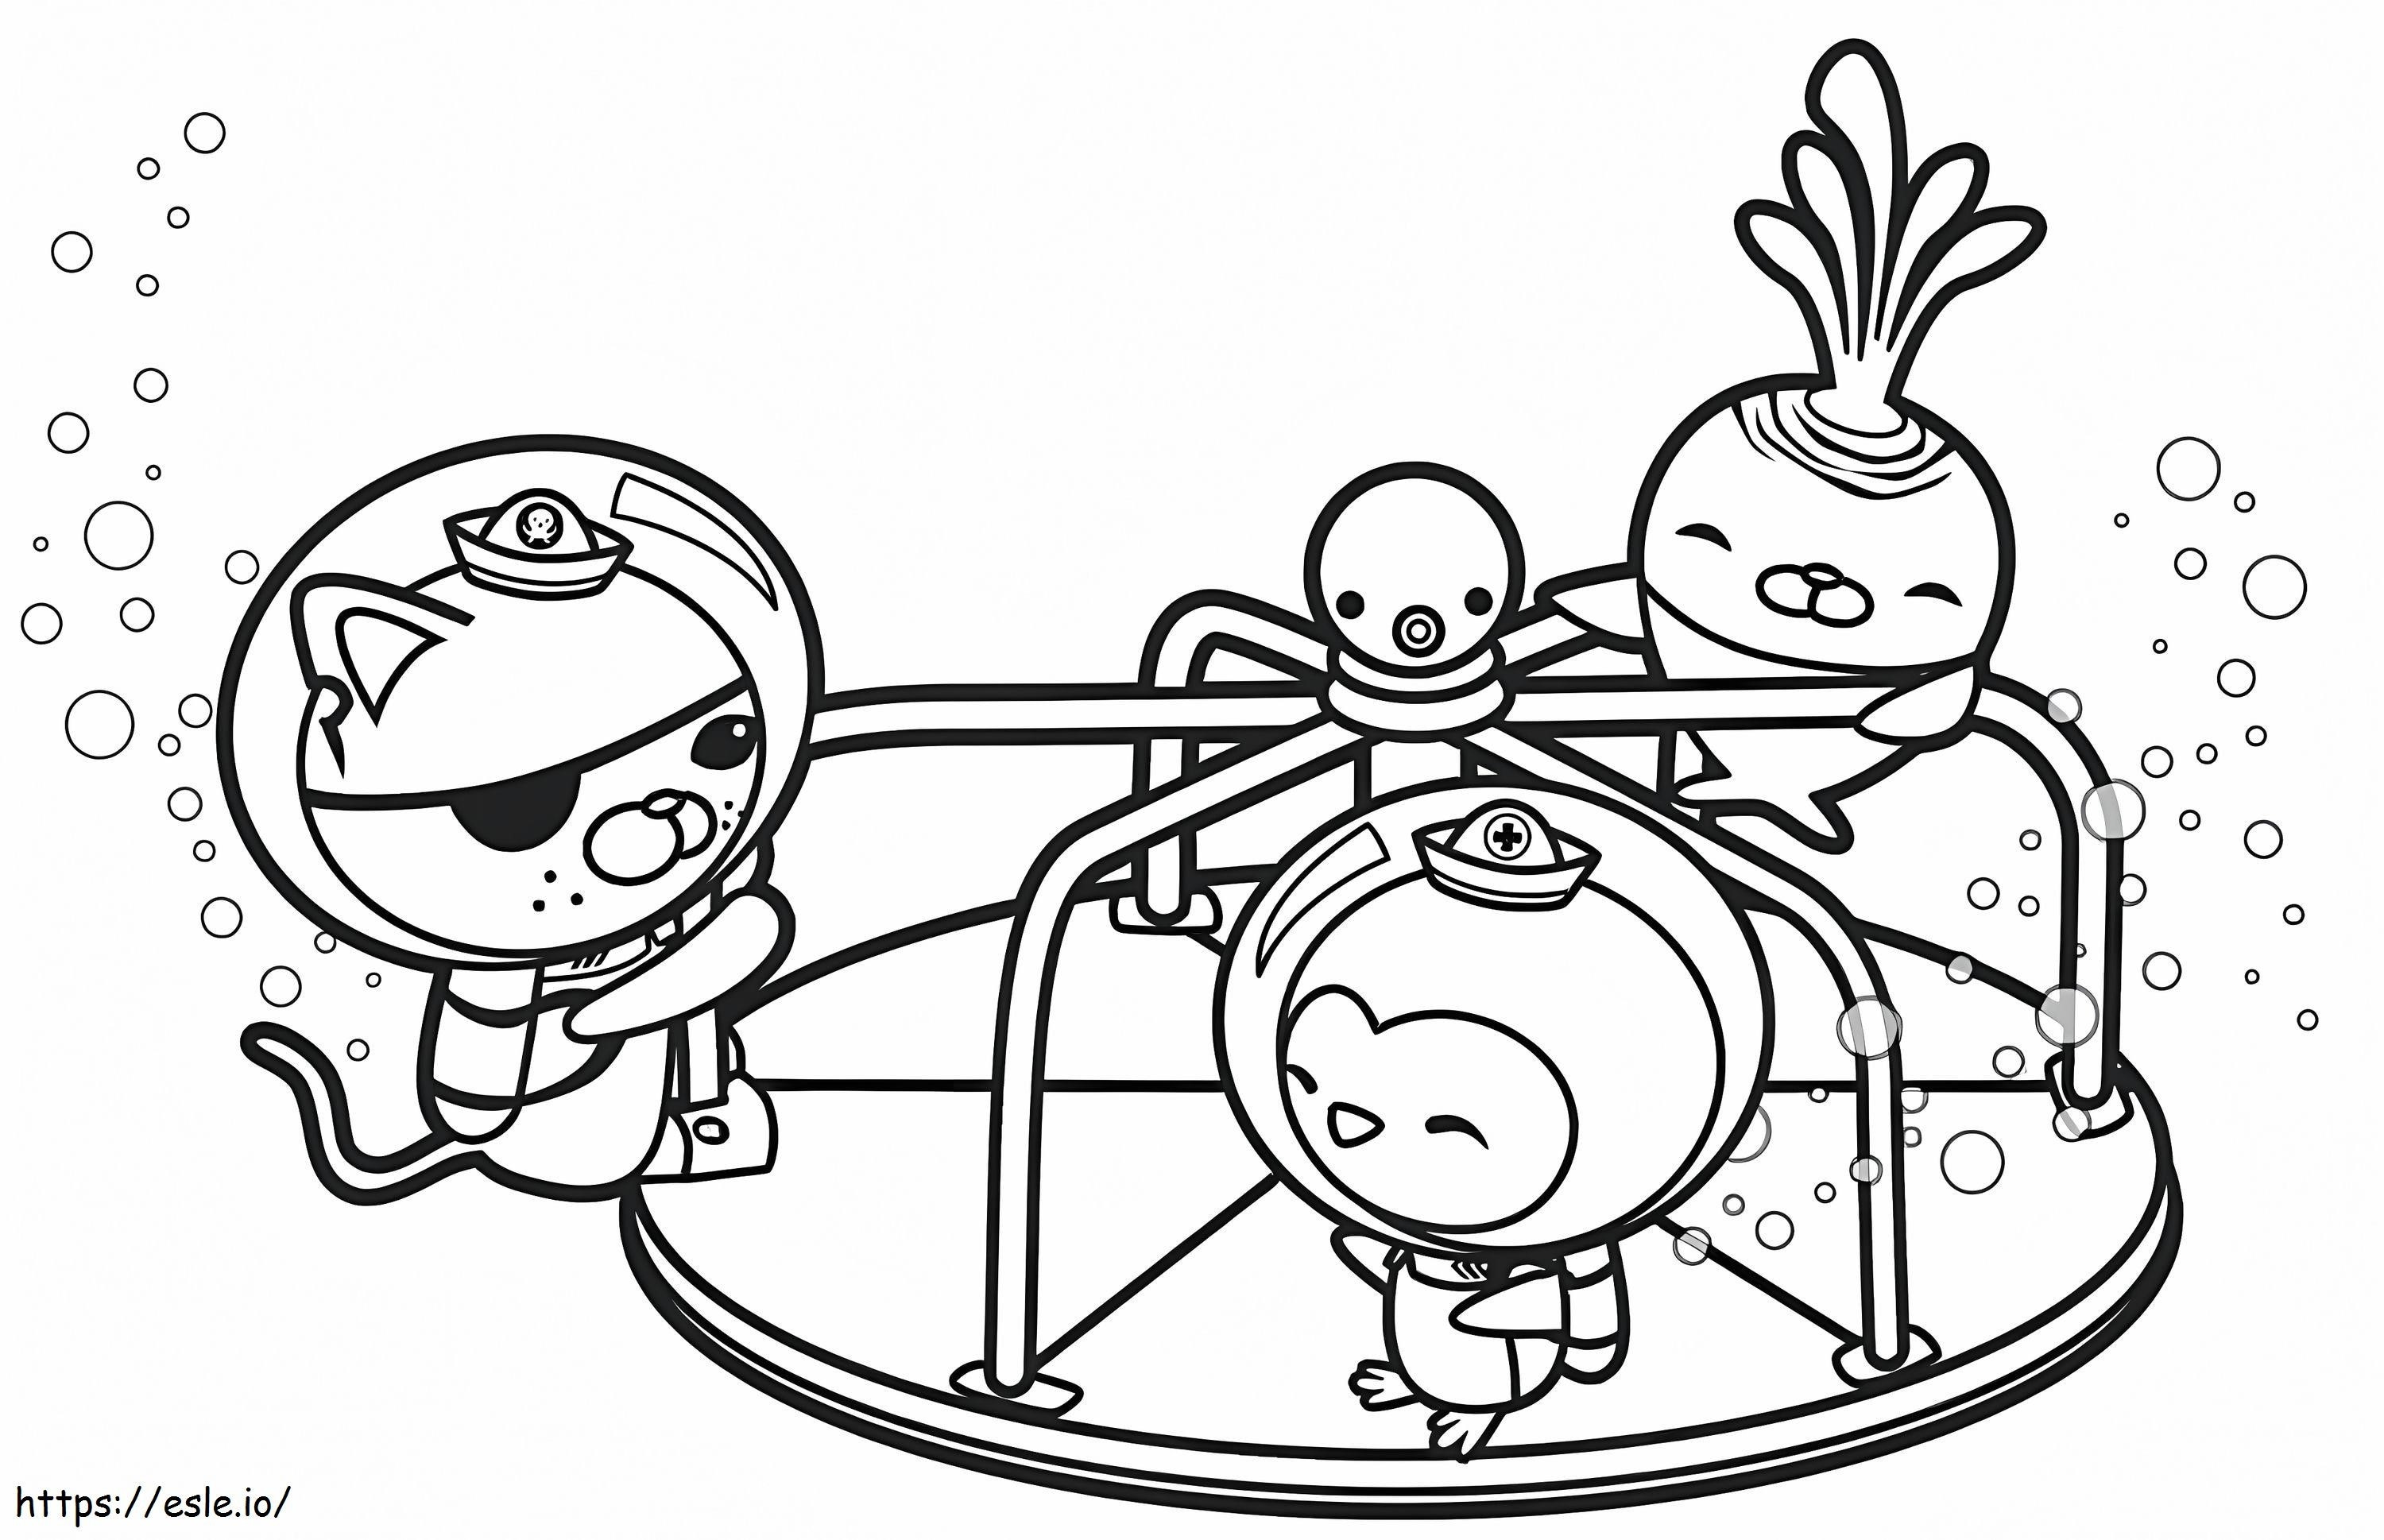 Octonauts Playing Wheel coloring page